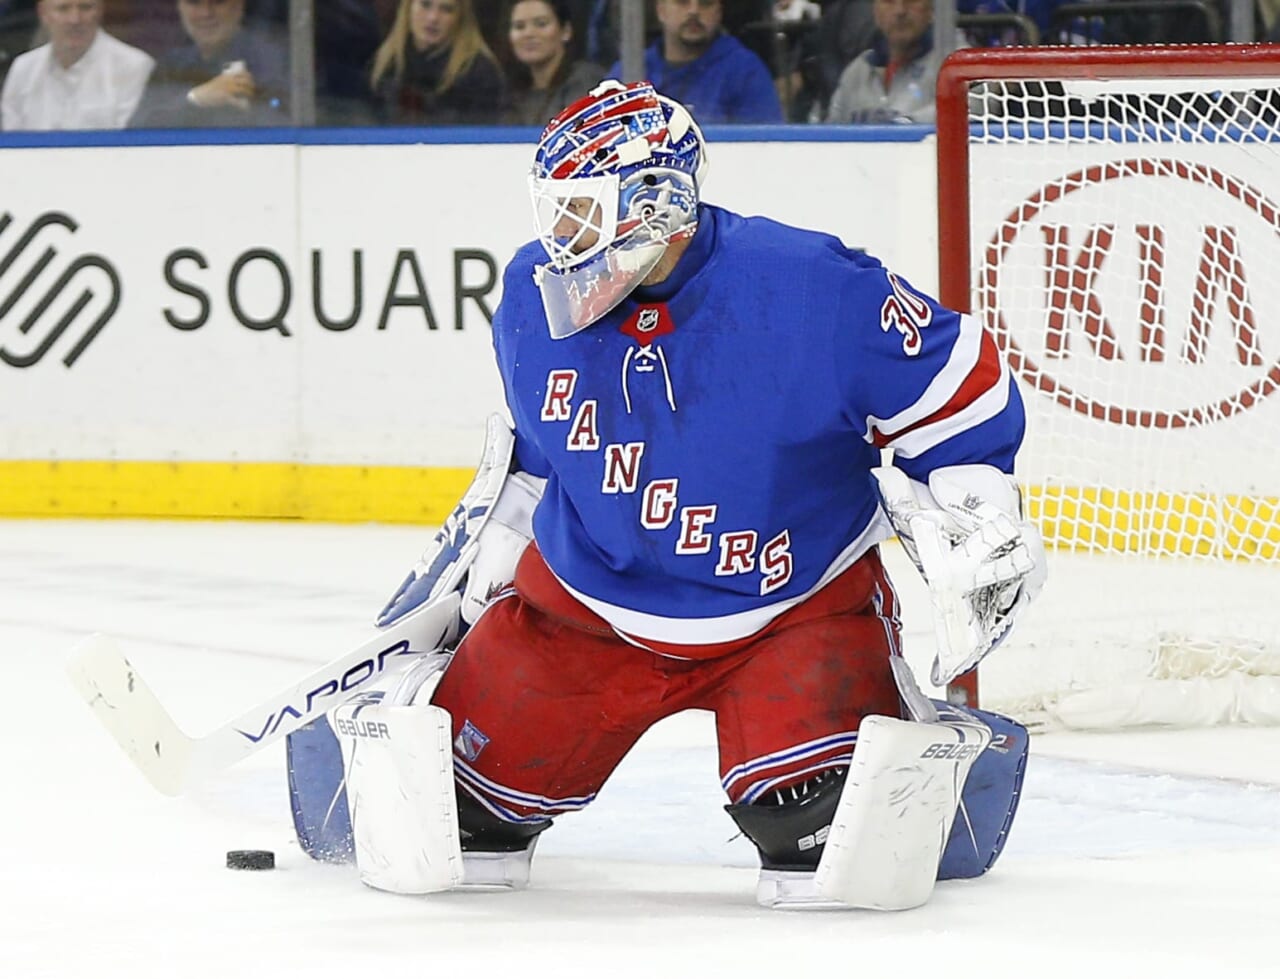 Lundqvist will return to the New York Rangers after his playing career is over